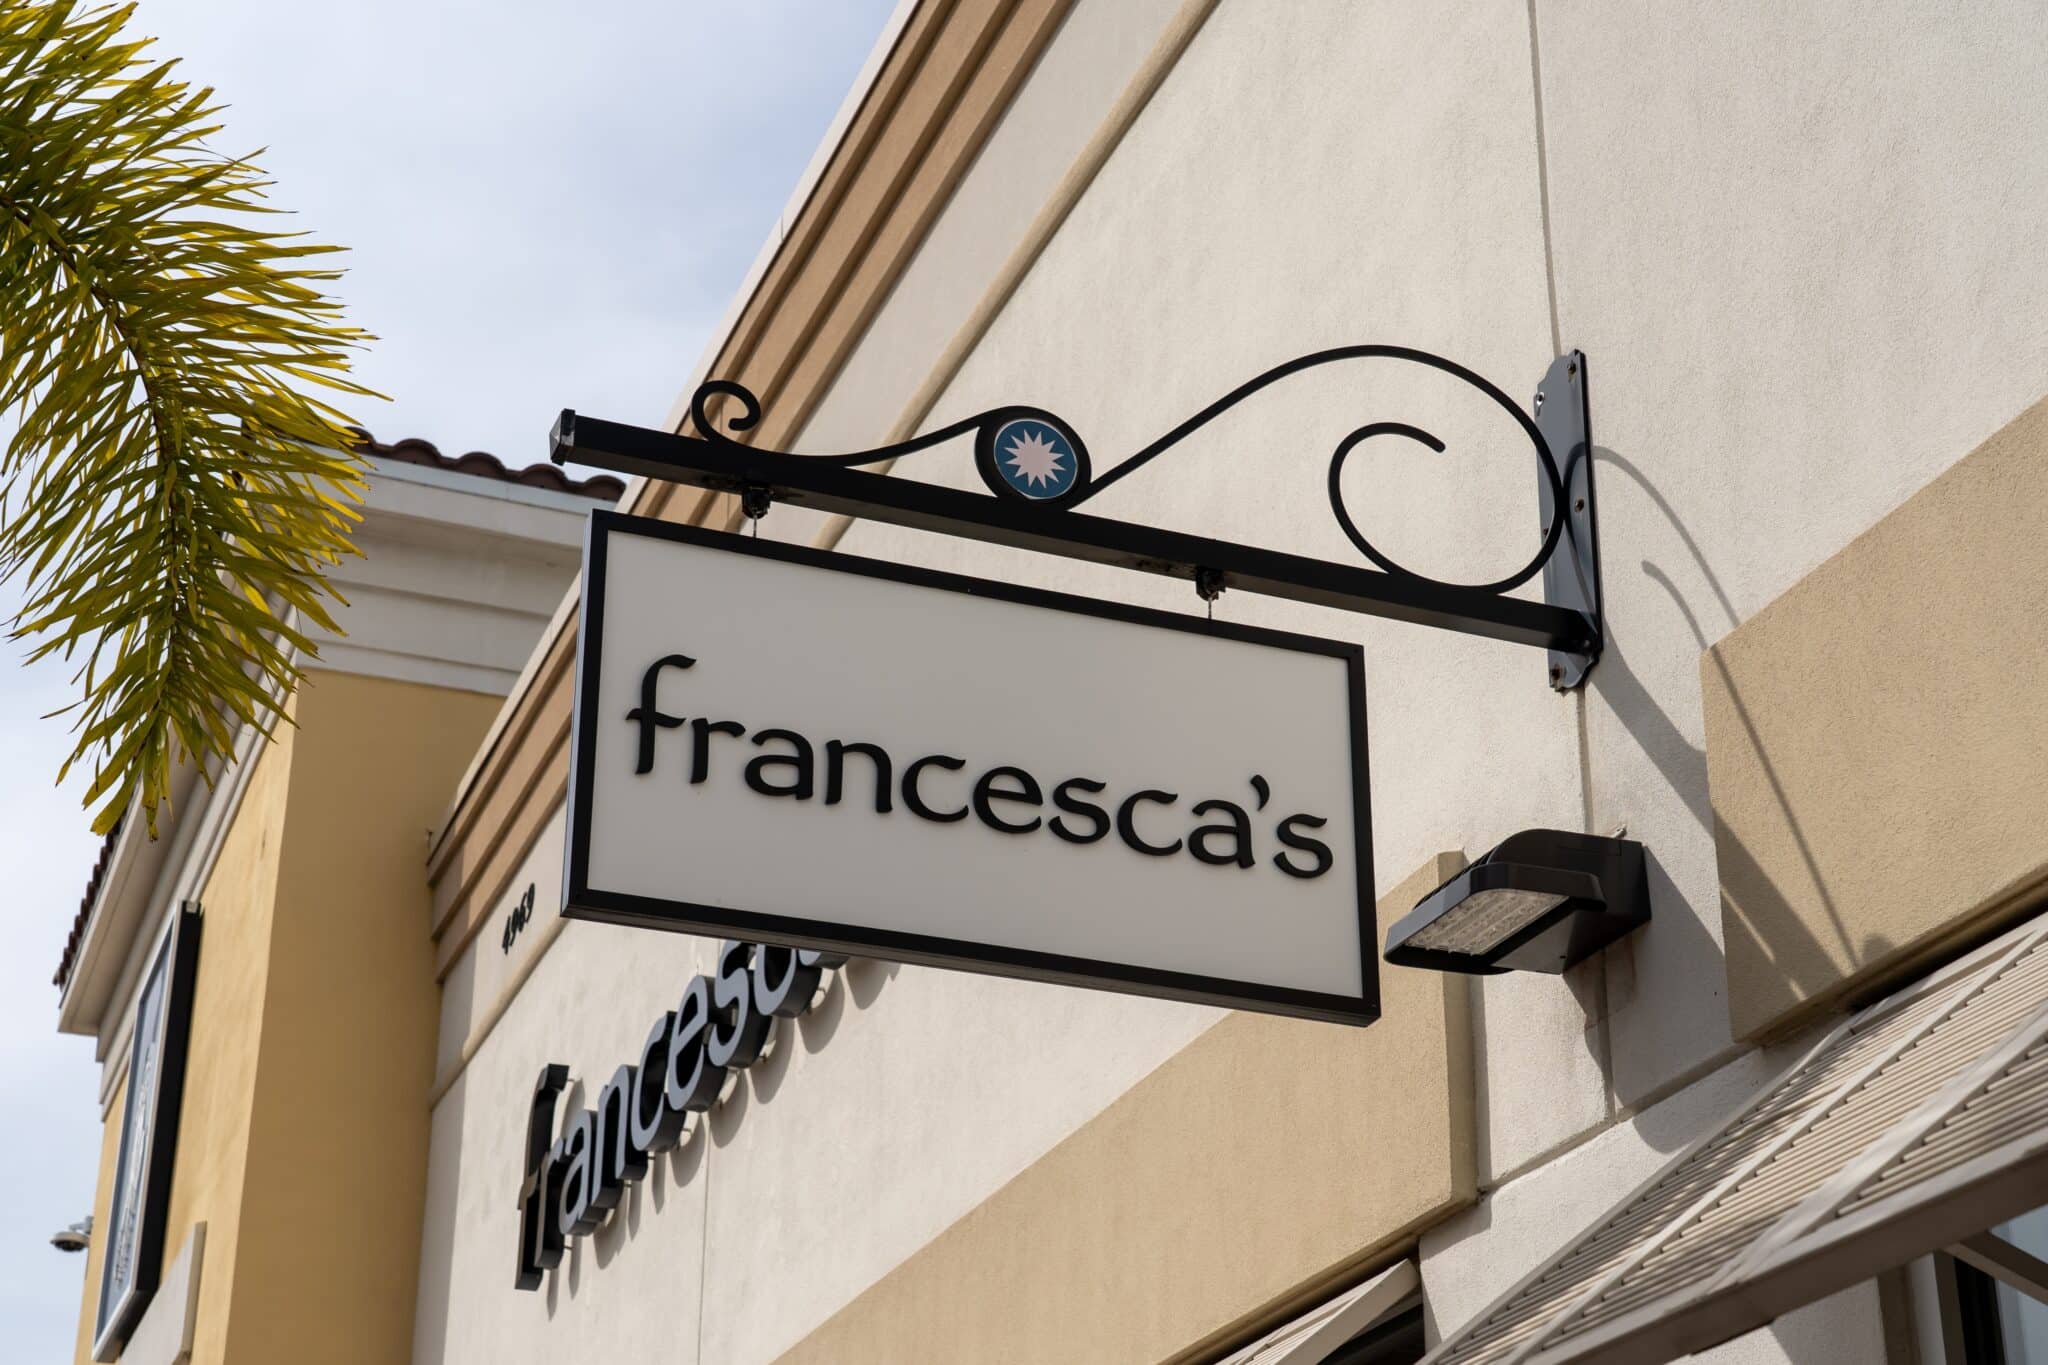 Storefront of Francesca's with a hanging sign featuring the store's name. The sign, embodying a blend of simple and modern design, is attached to a cream-colored wall. Part of a palm tree is visible on the left side, capturing Francesca's transformation from brick-and-mortar to an eCommerce-savvy brand.